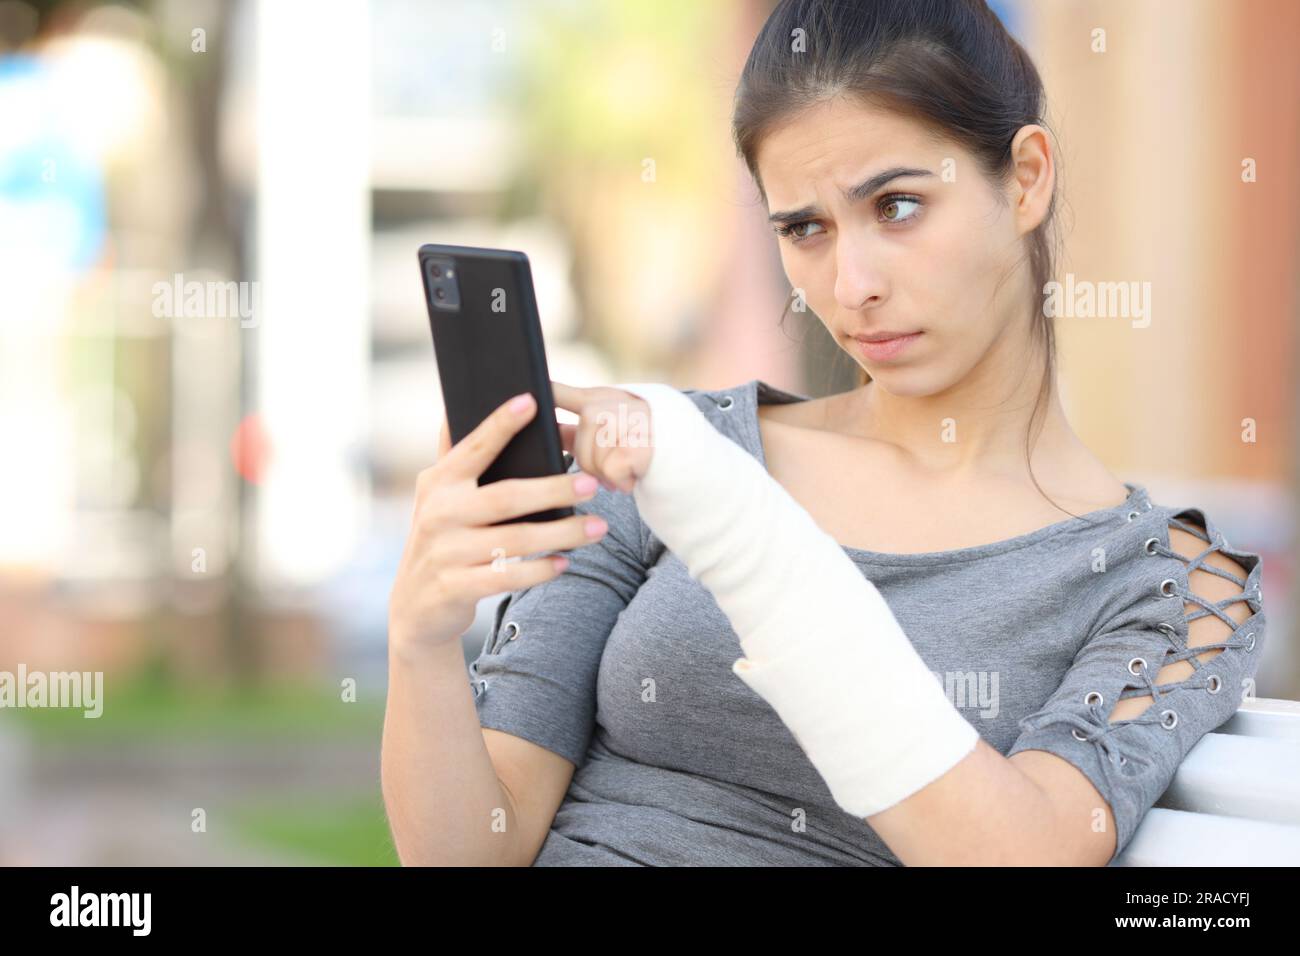 Suspicious convalescent girl checking phone content in the street Stock Photo